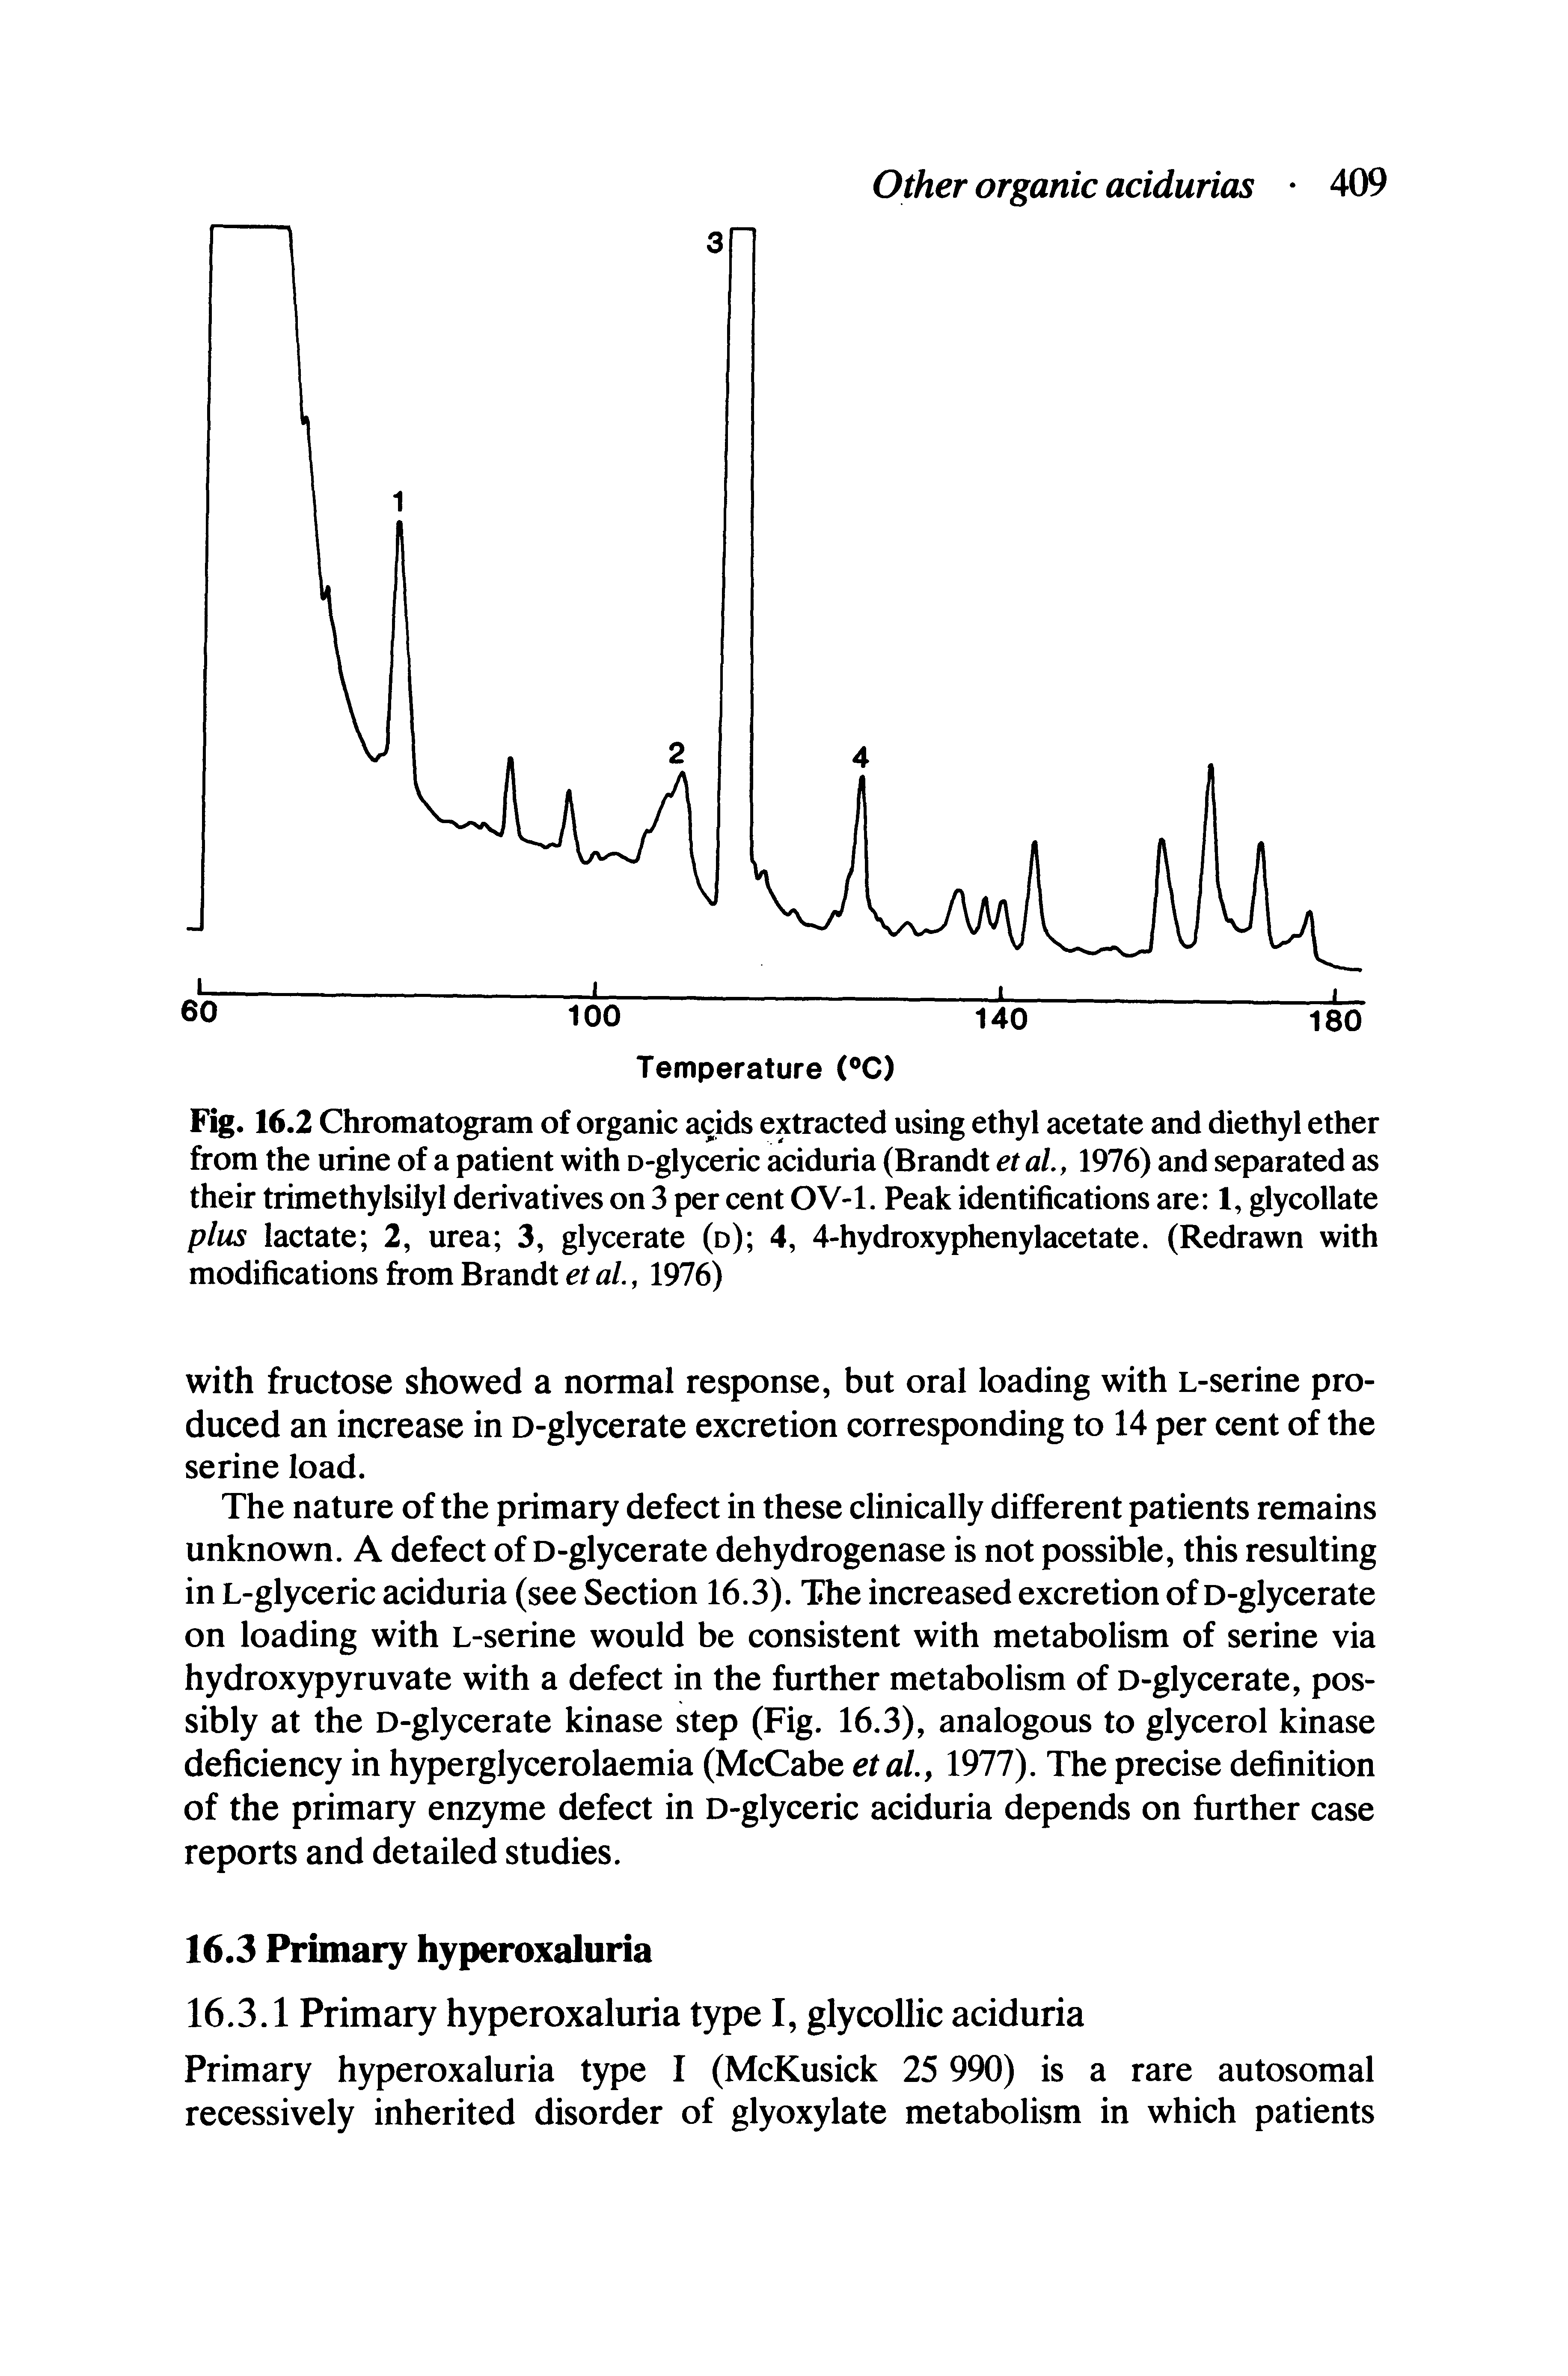 Fig. 16.2 Chromatogram of organic acids extracted using ethyl acetate and diethyl ether from the urine of a patient with o-glyceric aciduria (Brandt et al, 1976) and separated as their trimethylsiiyl derivatives on 3 per cent OV-1. Peak identifications are 1, glycollate plus lactate 2, urea 3, glycerate (d) 4, 4-hydroxyphenylacetate. (Redrawn with modifications from Brandt et al, 1976)...